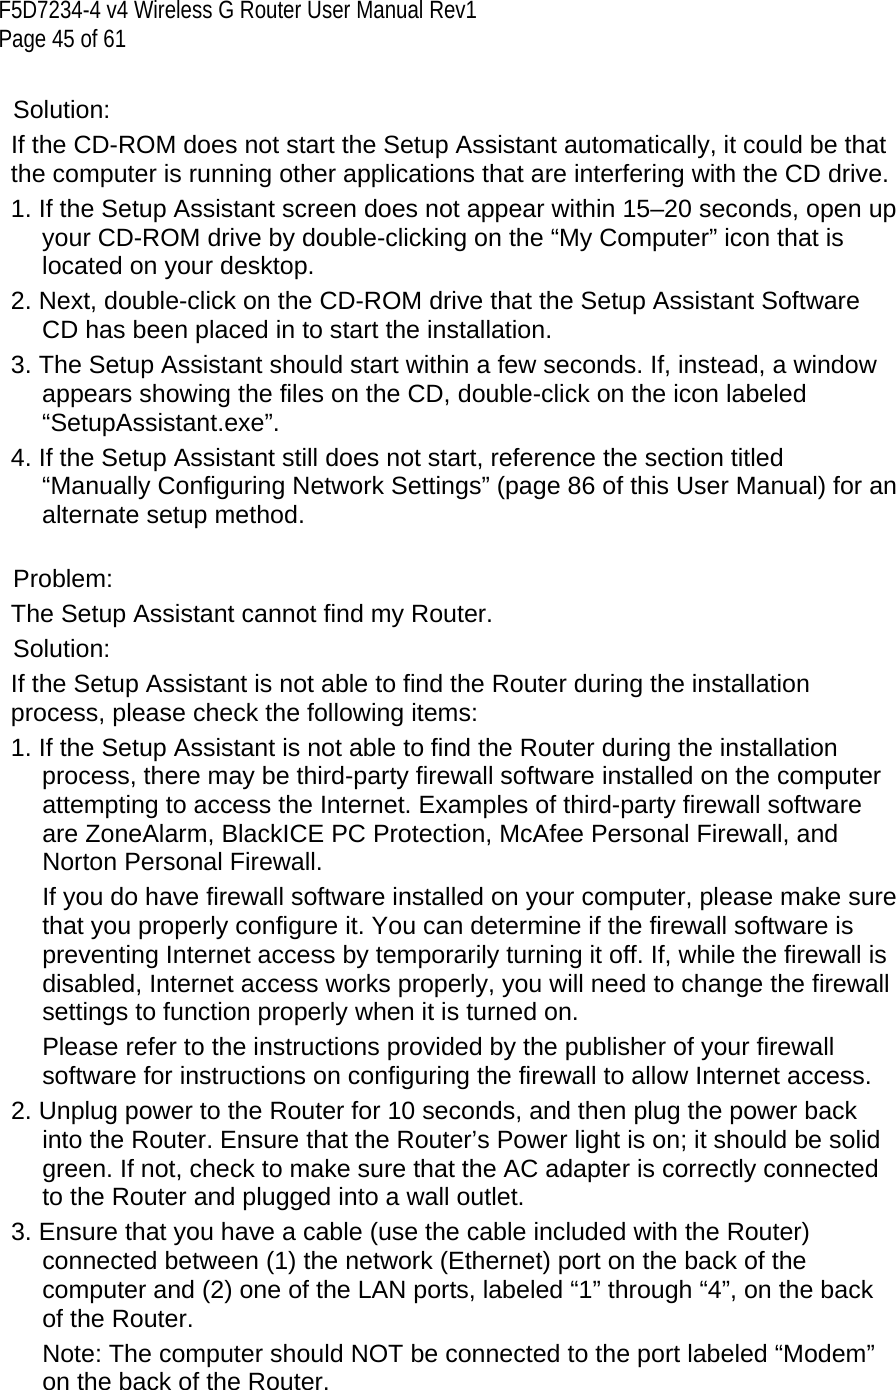 F5D7234-4 v4 Wireless G Router User Manual Rev1  Page 45 of 61   Solution: If the CD-ROM does not start the Setup Assistant automatically, it could be that the computer is running other applications that are interfering with the CD drive.  1. If the Setup Assistant screen does not appear within 15–20 seconds, open up your CD-ROM drive by double-clicking on the “My Computer” icon that is located on your desktop. 2. Next, double-click on the CD-ROM drive that the Setup Assistant Software CD has been placed in to start the installation. 3. The Setup Assistant should start within a few seconds. If, instead, a window appears showing the files on the CD, double-click on the icon labeled “SetupAssistant.exe”. 4. If the Setup Assistant still does not start, reference the section titled “Manually Configuring Network Settings” (page 86 of this User Manual) for an alternate setup method.   Problem: The Setup Assistant cannot find my Router. Solution:  If the Setup Assistant is not able to find the Router during the installation process, please check the following items: 1. If the Setup Assistant is not able to find the Router during the installation process, there may be third-party firewall software installed on the computer attempting to access the Internet. Examples of third-party firewall software are ZoneAlarm, BlackICE PC Protection, McAfee Personal Firewall, and Norton Personal Firewall.  If you do have firewall software installed on your computer, please make sure that you properly configure it. You can determine if the firewall software is preventing Internet access by temporarily turning it off. If, while the firewall is disabled, Internet access works properly, you will need to change the firewall settings to function properly when it is turned on.  Please refer to the instructions provided by the publisher of your firewall software for instructions on configuring the firewall to allow Internet access. 2. Unplug power to the Router for 10 seconds, and then plug the power back into the Router. Ensure that the Router’s Power light is on; it should be solid green. If not, check to make sure that the AC adapter is correctly connected to the Router and plugged into a wall outlet. 3. Ensure that you have a cable (use the cable included with the Router) connected between (1) the network (Ethernet) port on the back of the computer and (2) one of the LAN ports, labeled “1” through “4”, on the back of the Router.  Note: The computer should NOT be connected to the port labeled “Modem” on the back of the Router. 